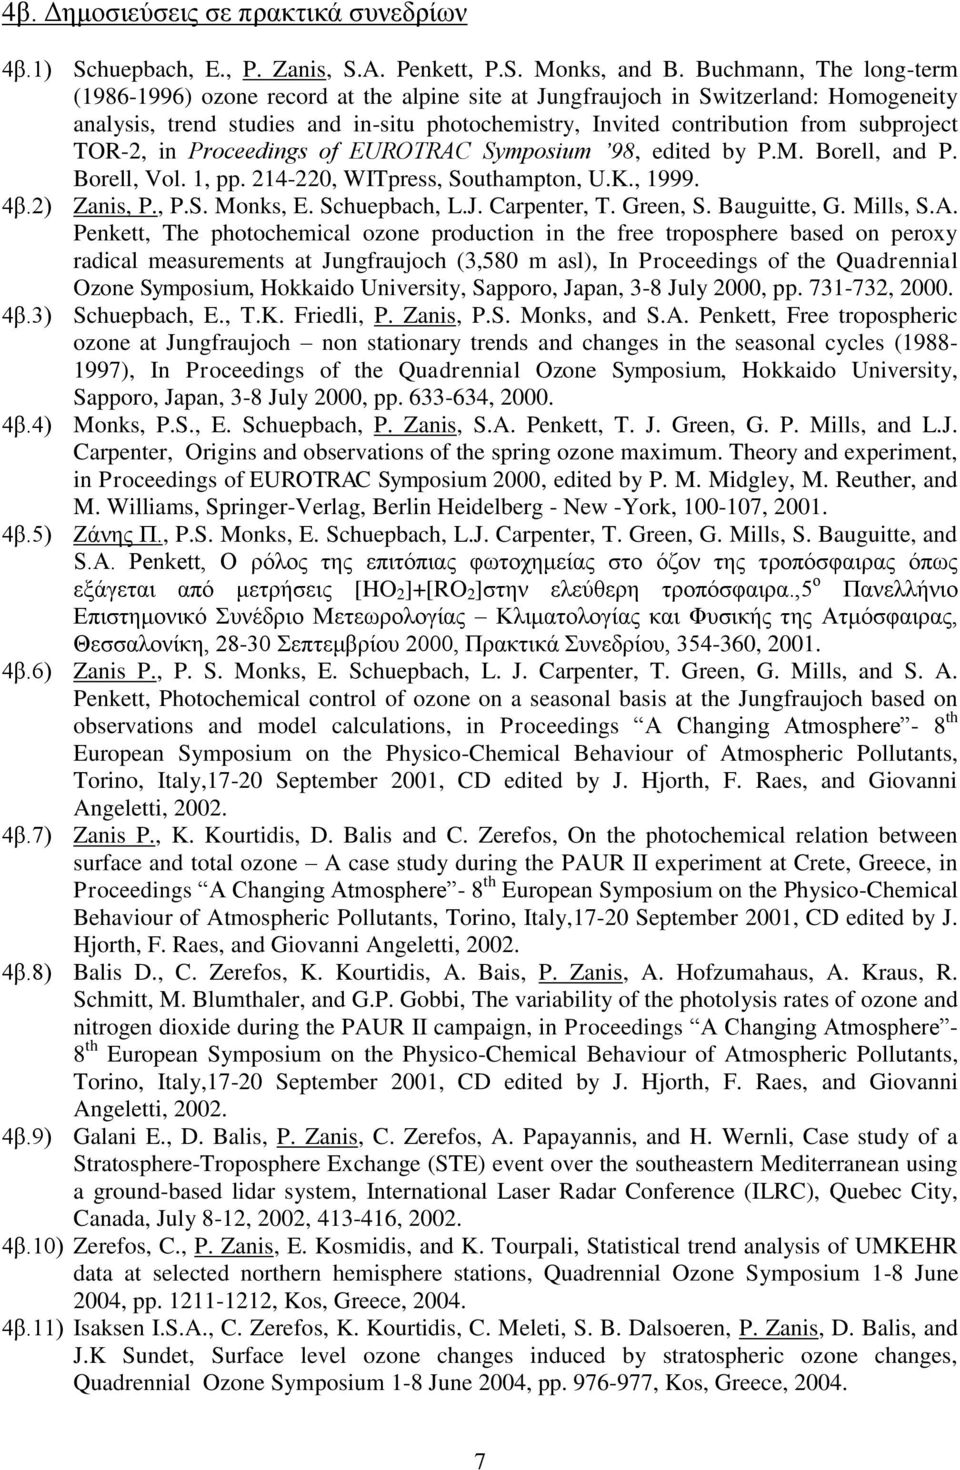 subproject TOR-2, in Proceedings of EUROTRAC Symposium 98, edited by P.M. Borell, and P. Borell, Vol. 1, pp. 214-220, WITpress, Southampton, U.K., 1999. 4β.2) Zanis, P., P.S. Monks, E. Schuepbach, L.